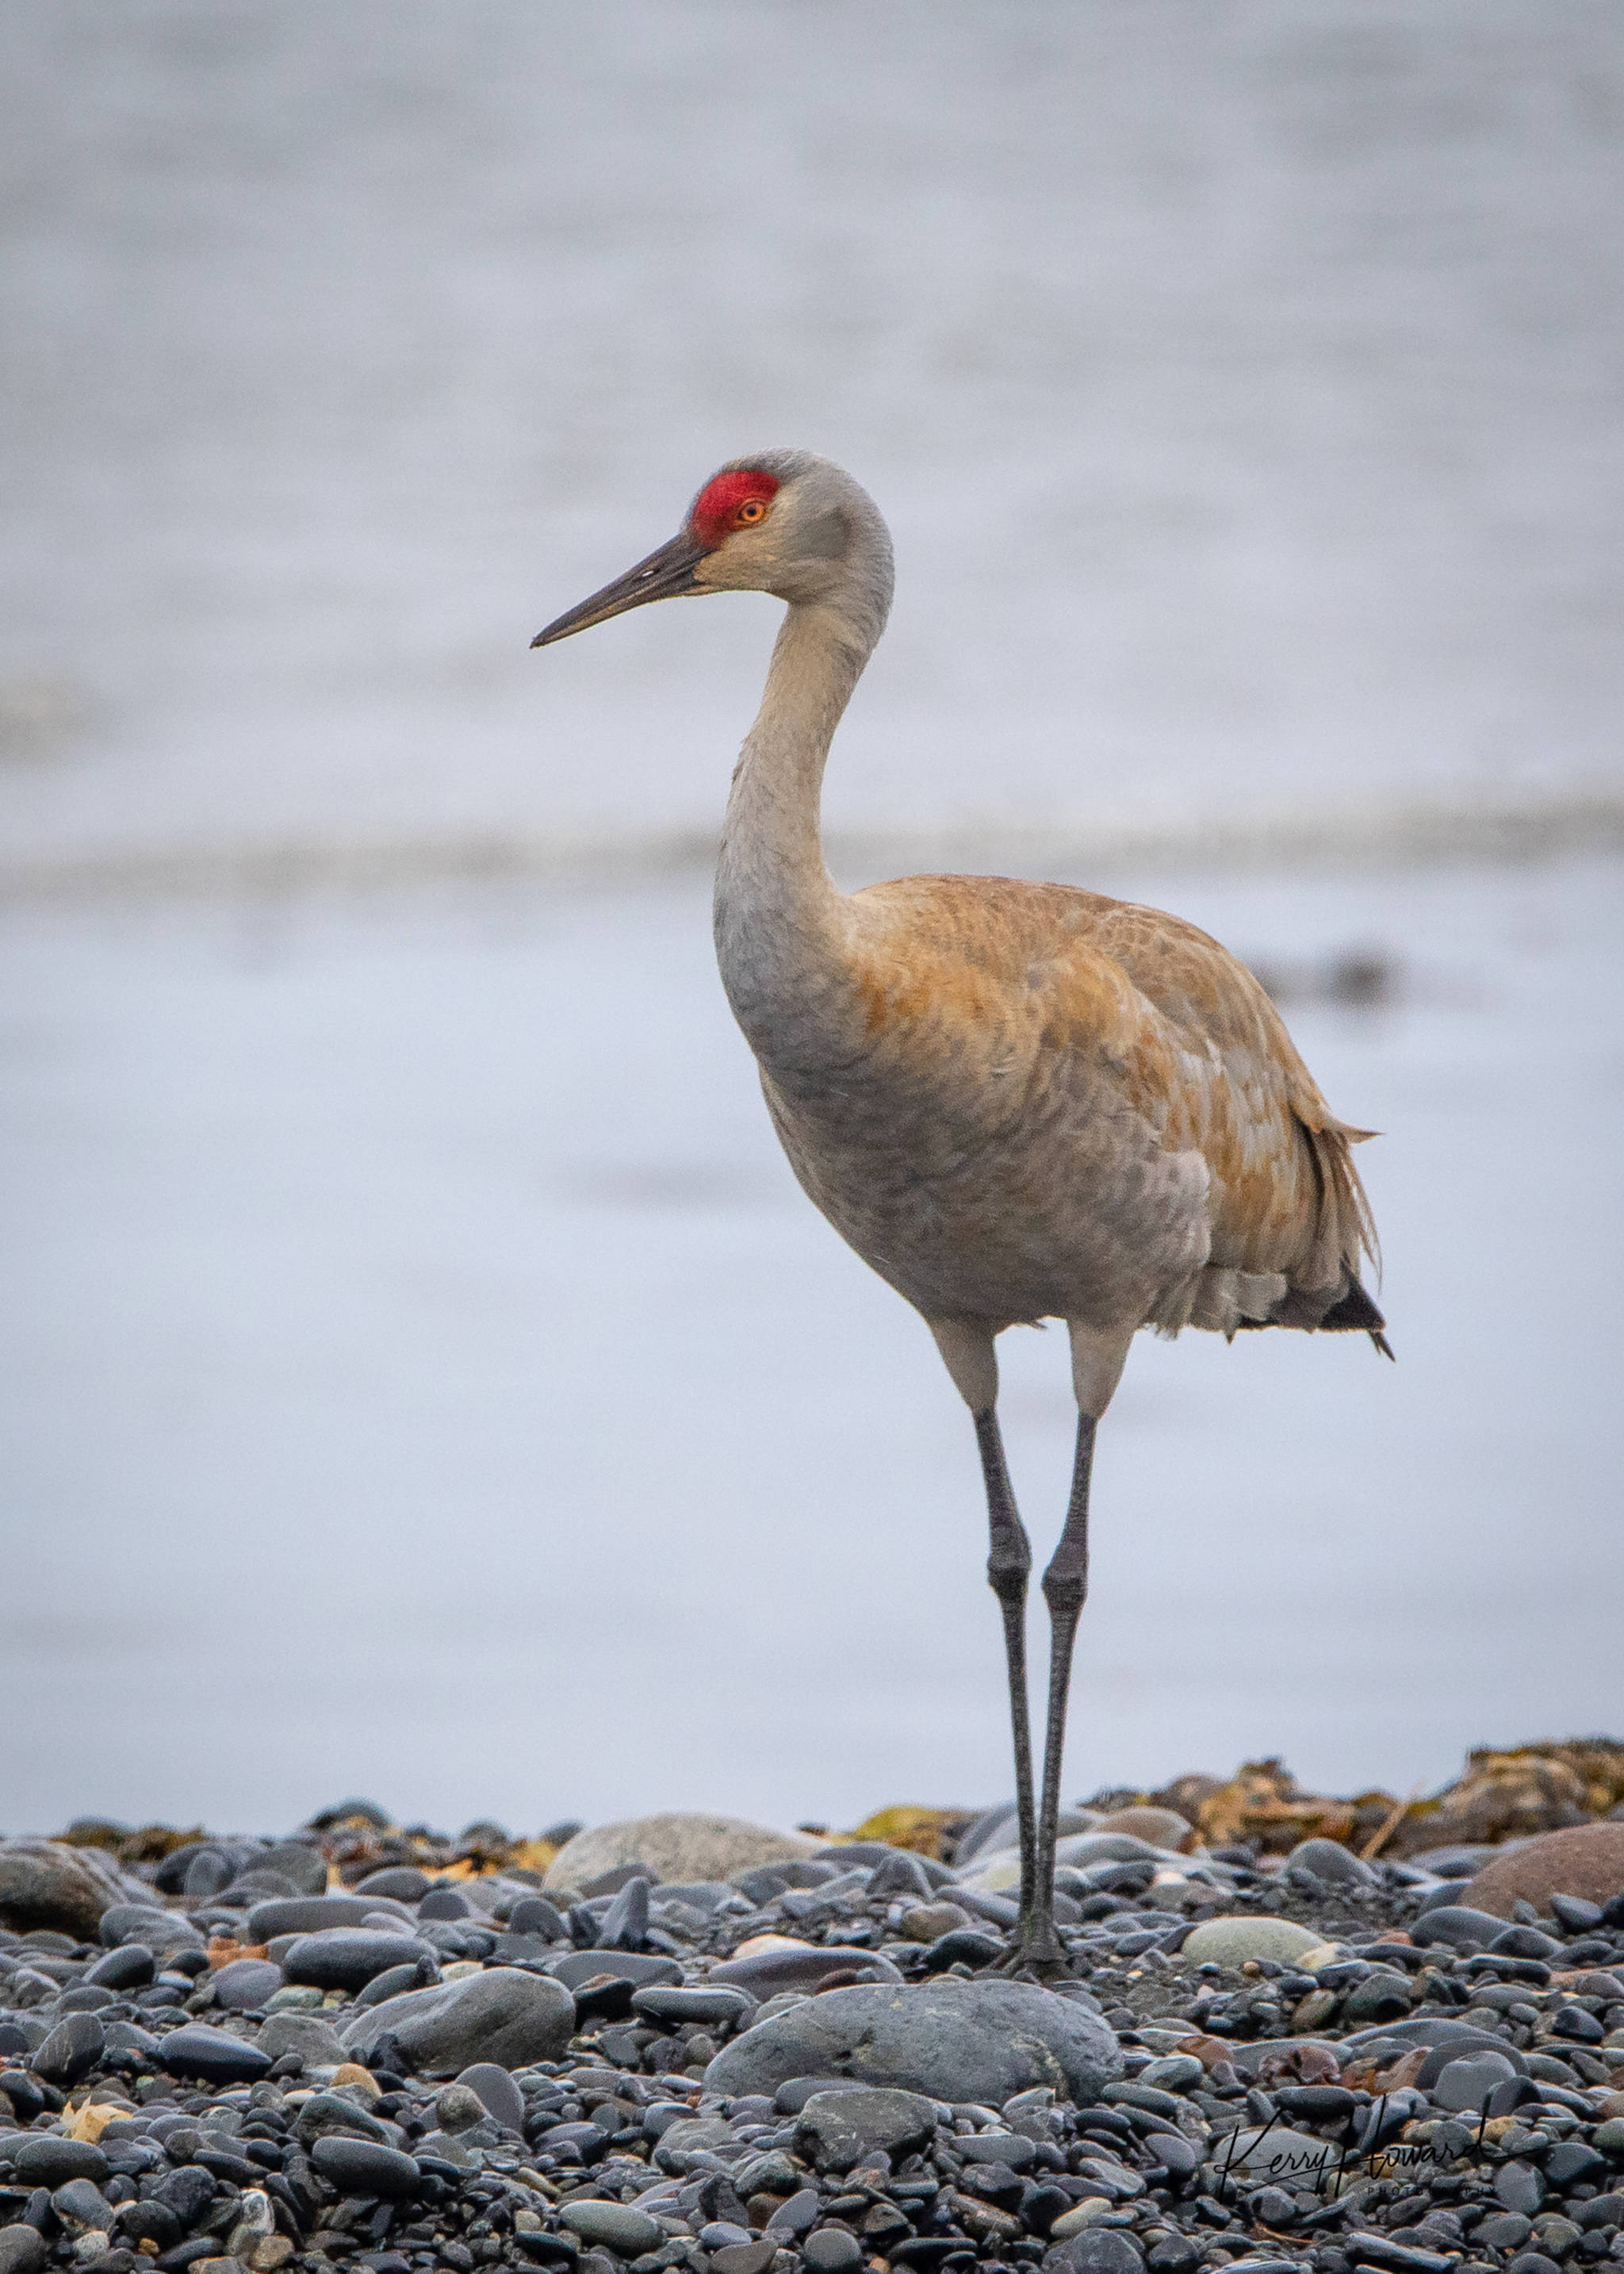 A sandhill crane pauses to soak up the sun in Homer on May 9. (Courtesy Photo | Kerry Howard)